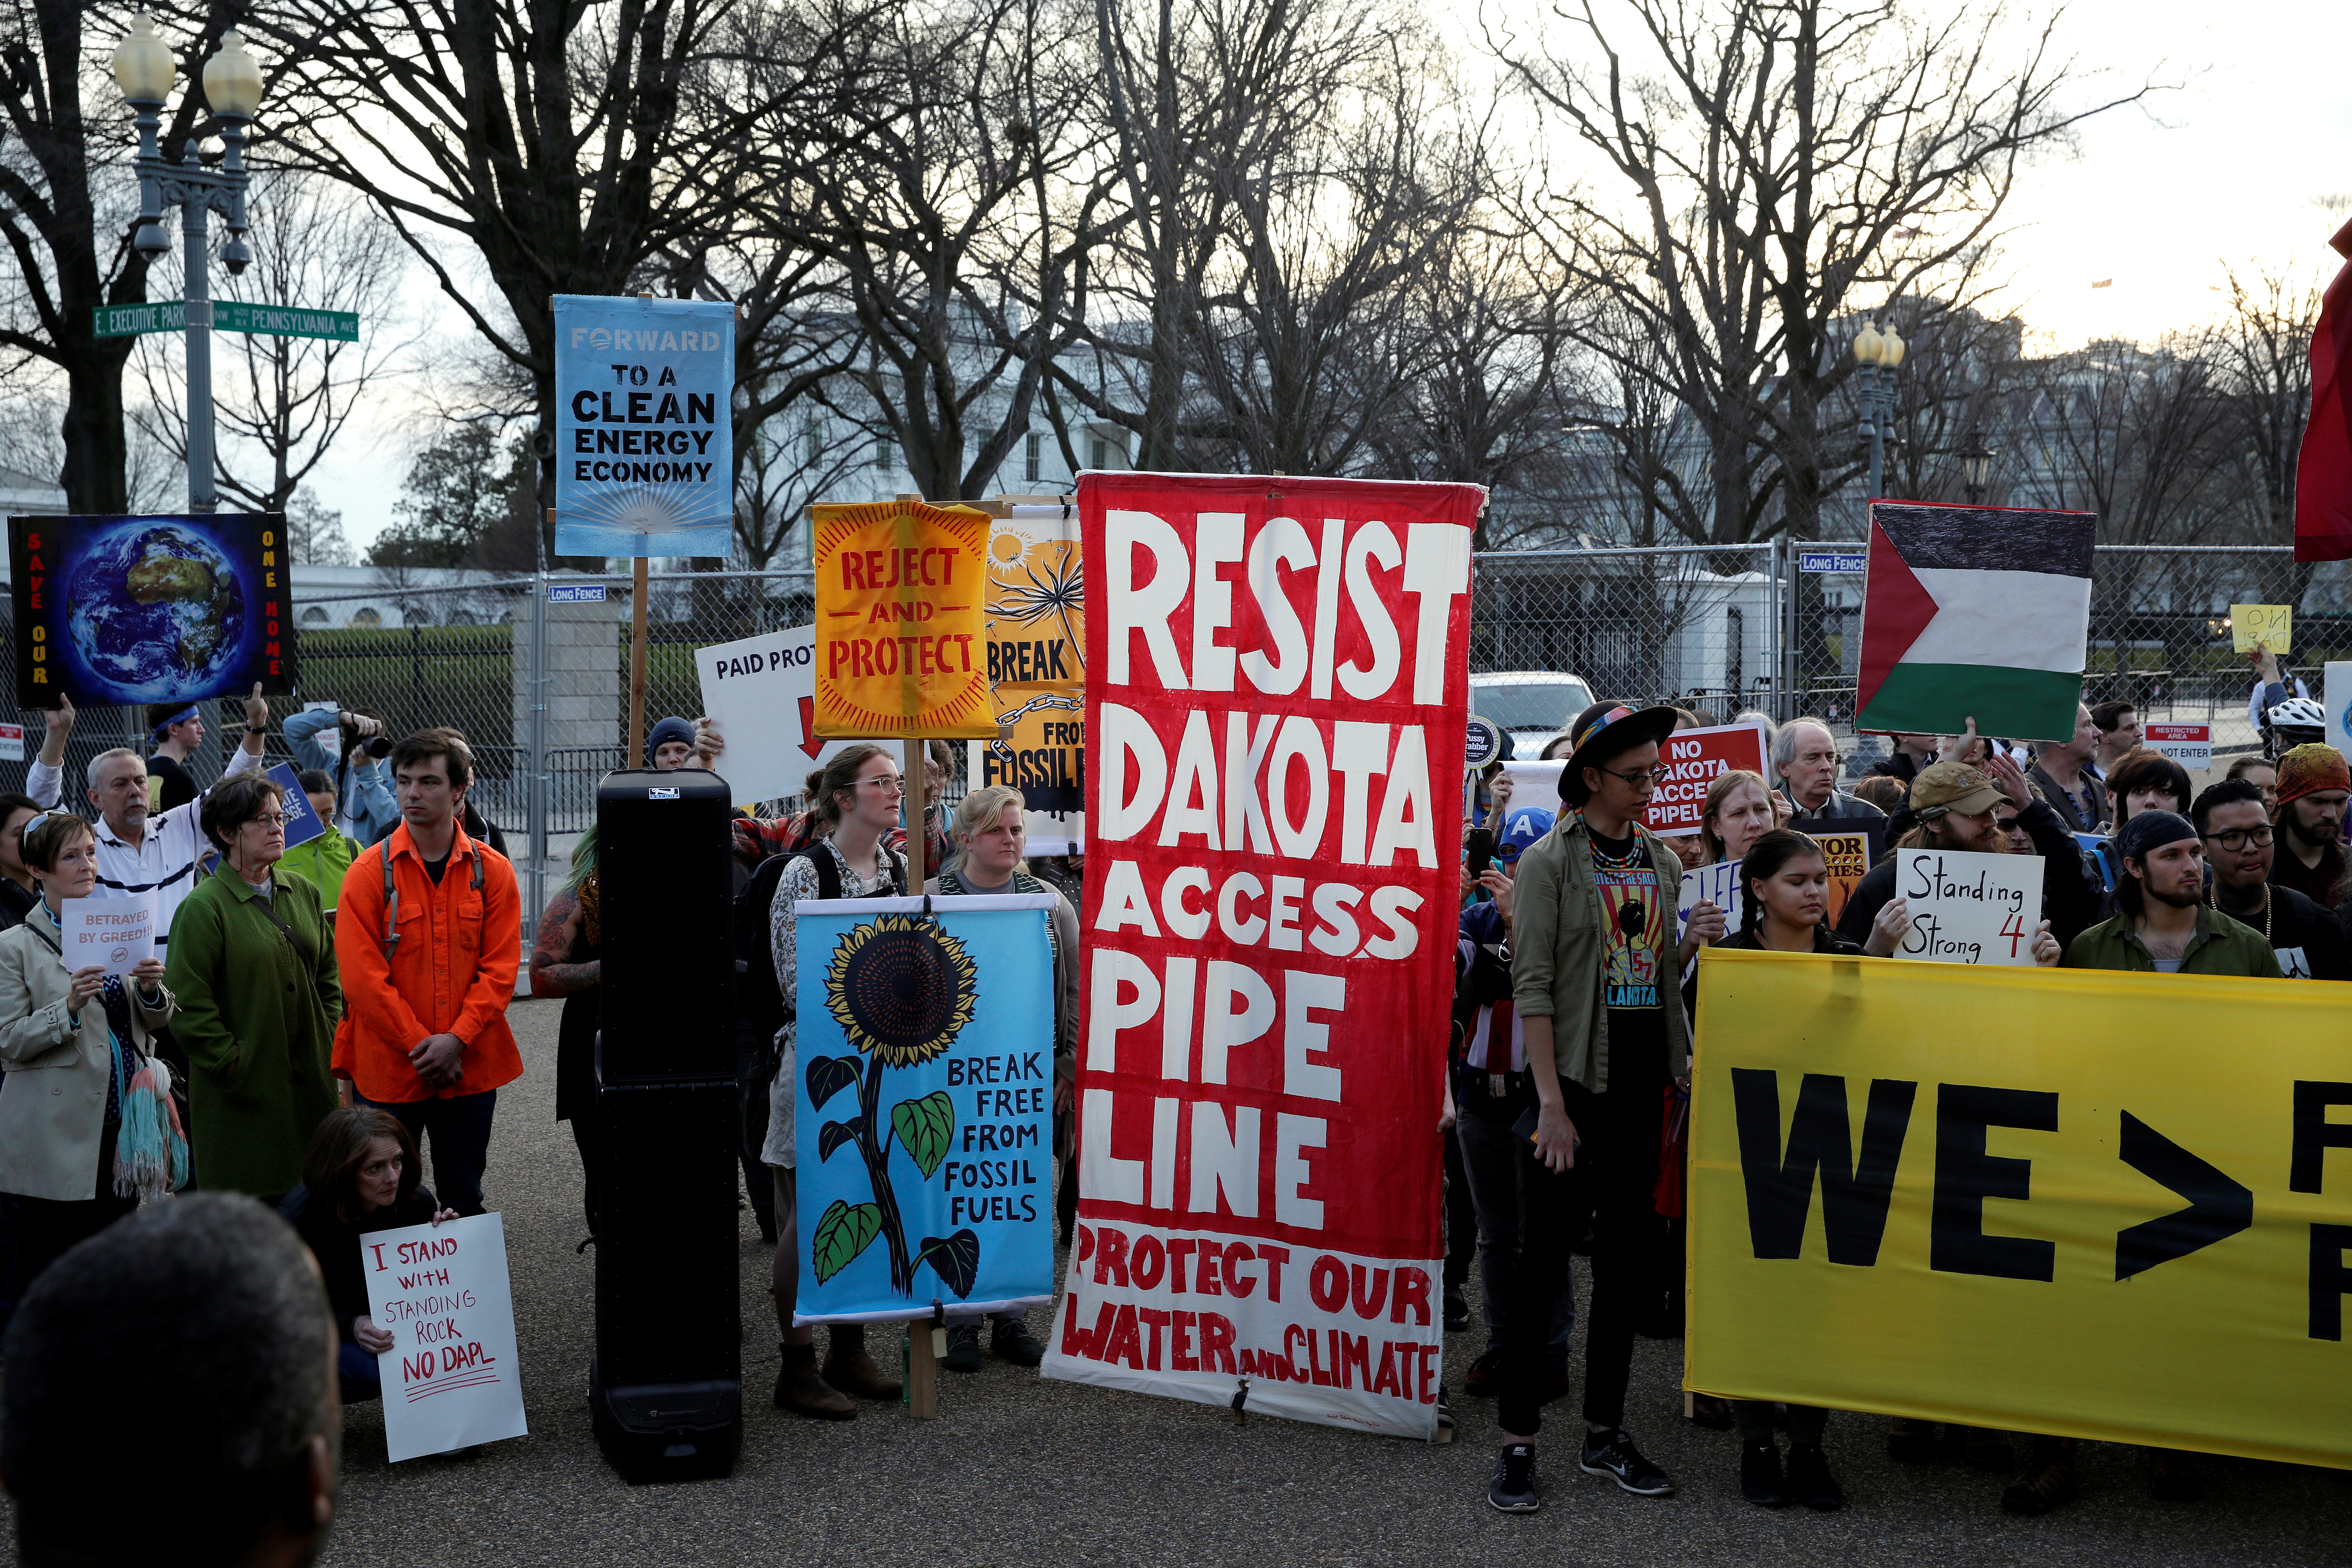 People protest against U.S. President Donald Trump's directive to permit the Dakota Access Pipeline during a demonstration at the White House in Washington.